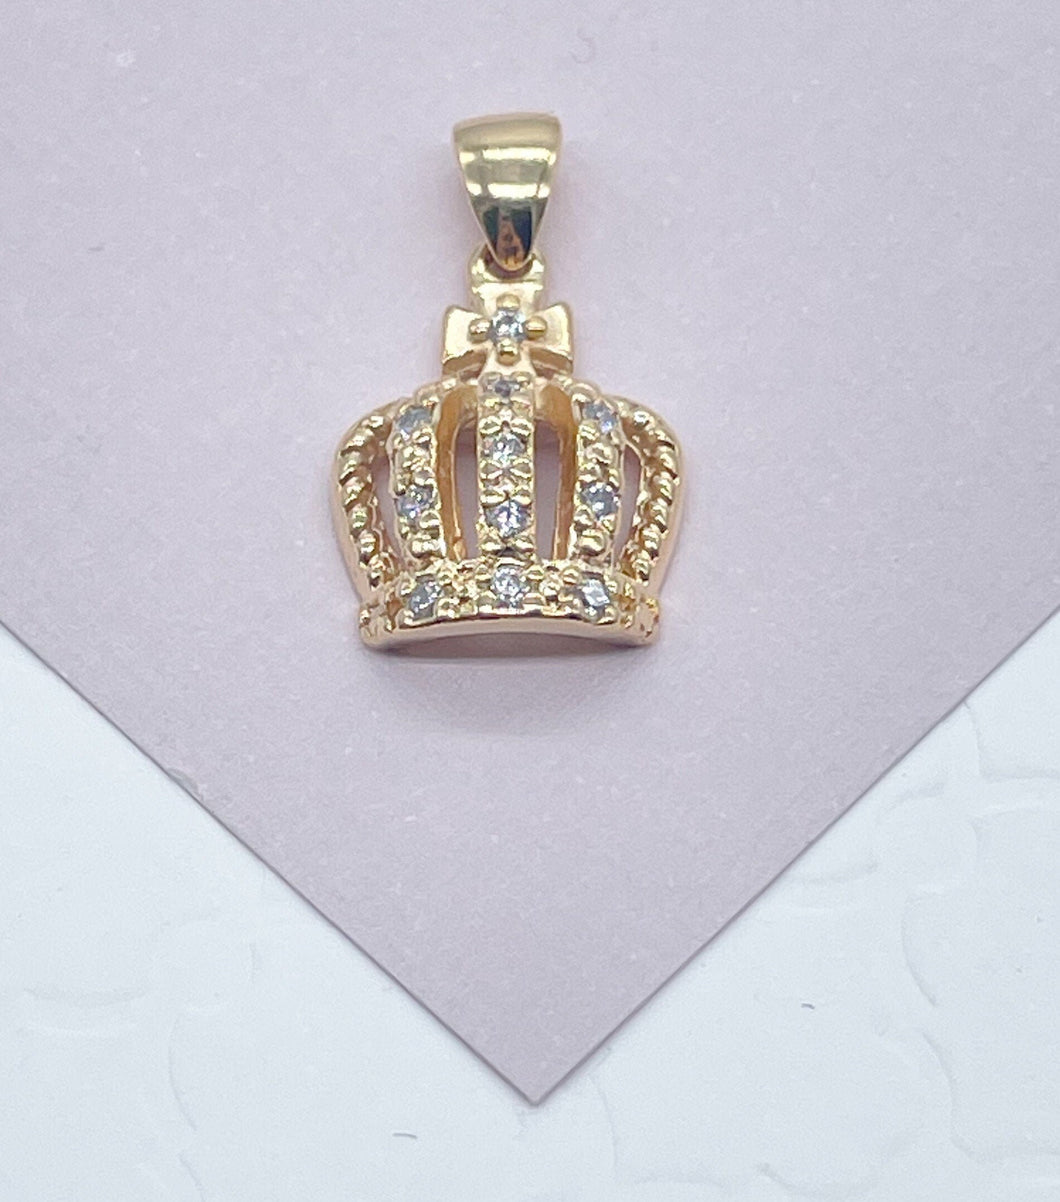 18k Gold Filled Dainty King's Crown Charm In Micro Pave Settings   Pendant And Jewelry Making Supplies